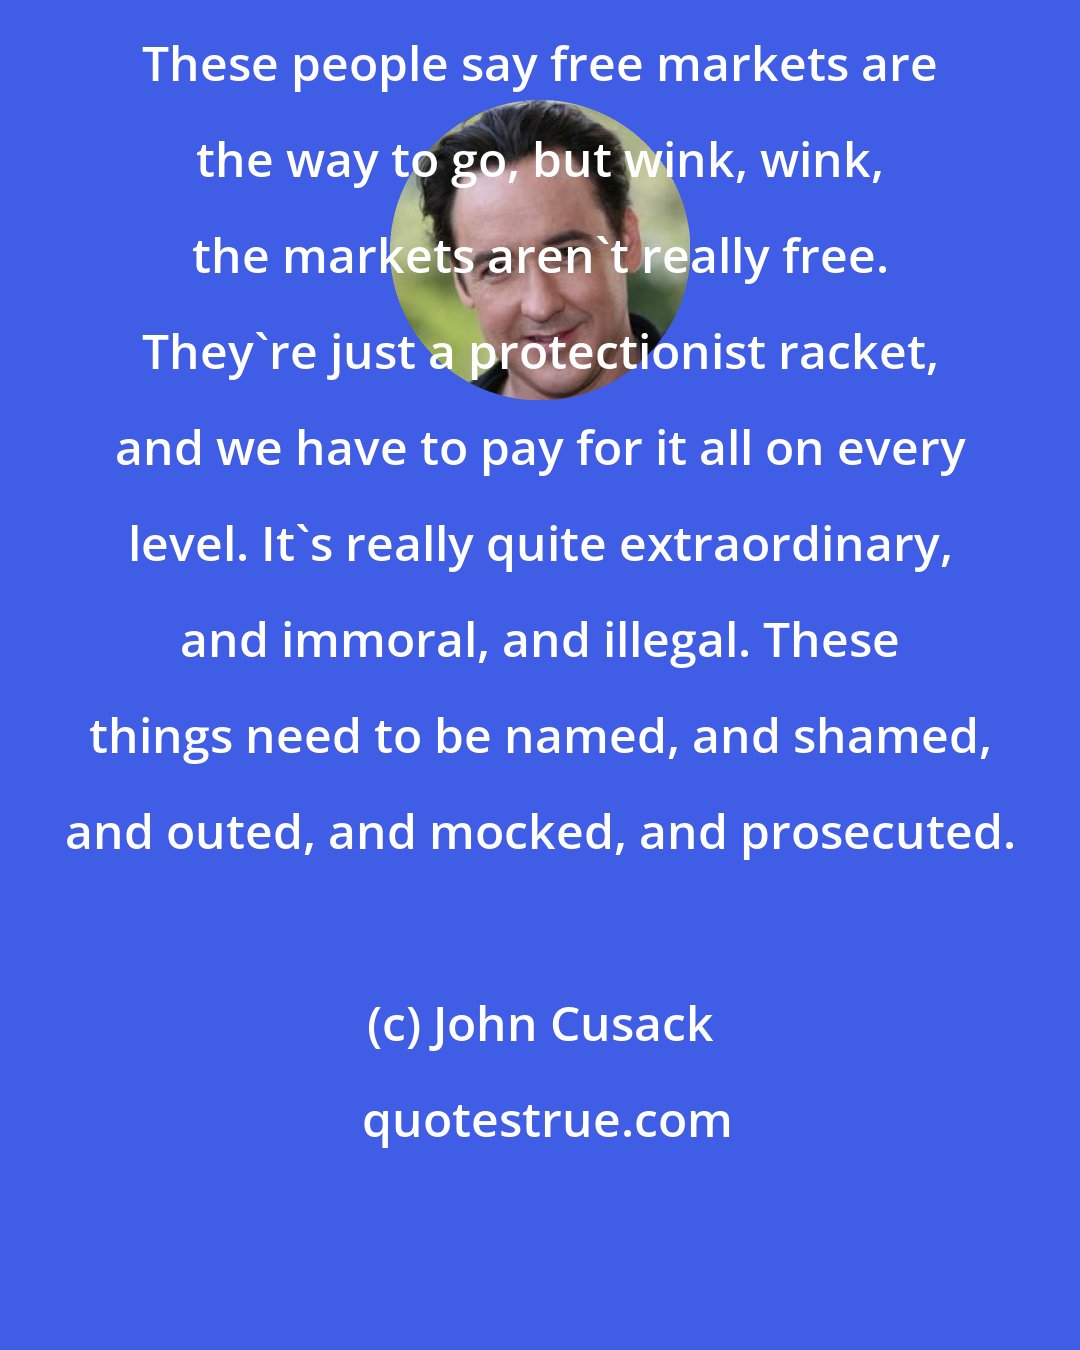 John Cusack: These people say free markets are the way to go, but wink, wink, the markets aren't really free. They're just a protectionist racket, and we have to pay for it all on every level. It's really quite extraordinary, and immoral, and illegal. These things need to be named, and shamed, and outed, and mocked, and prosecuted.